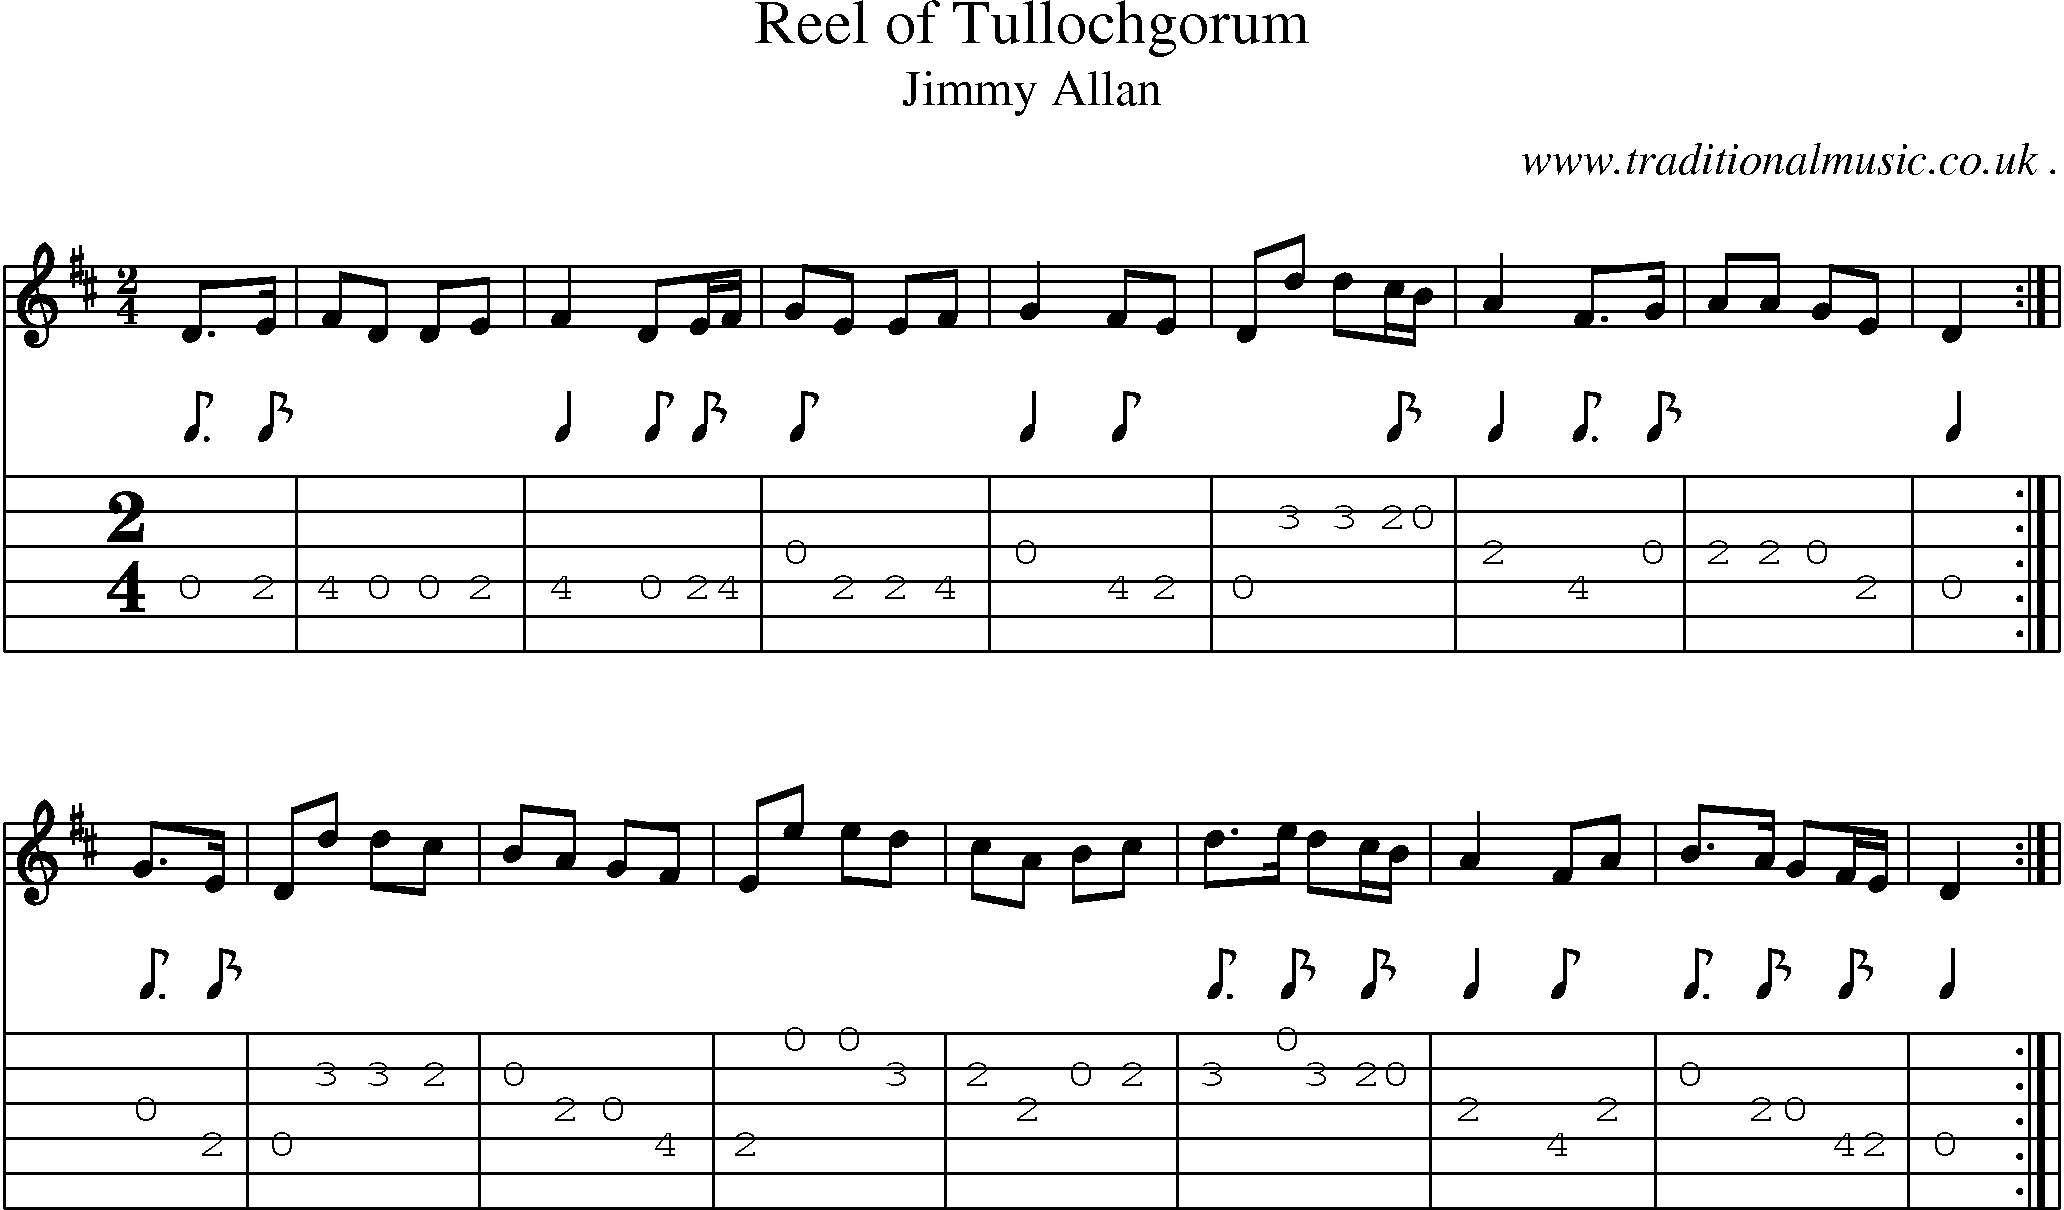 Sheet-Music and Guitar Tabs for Reel Of Tullochgorum